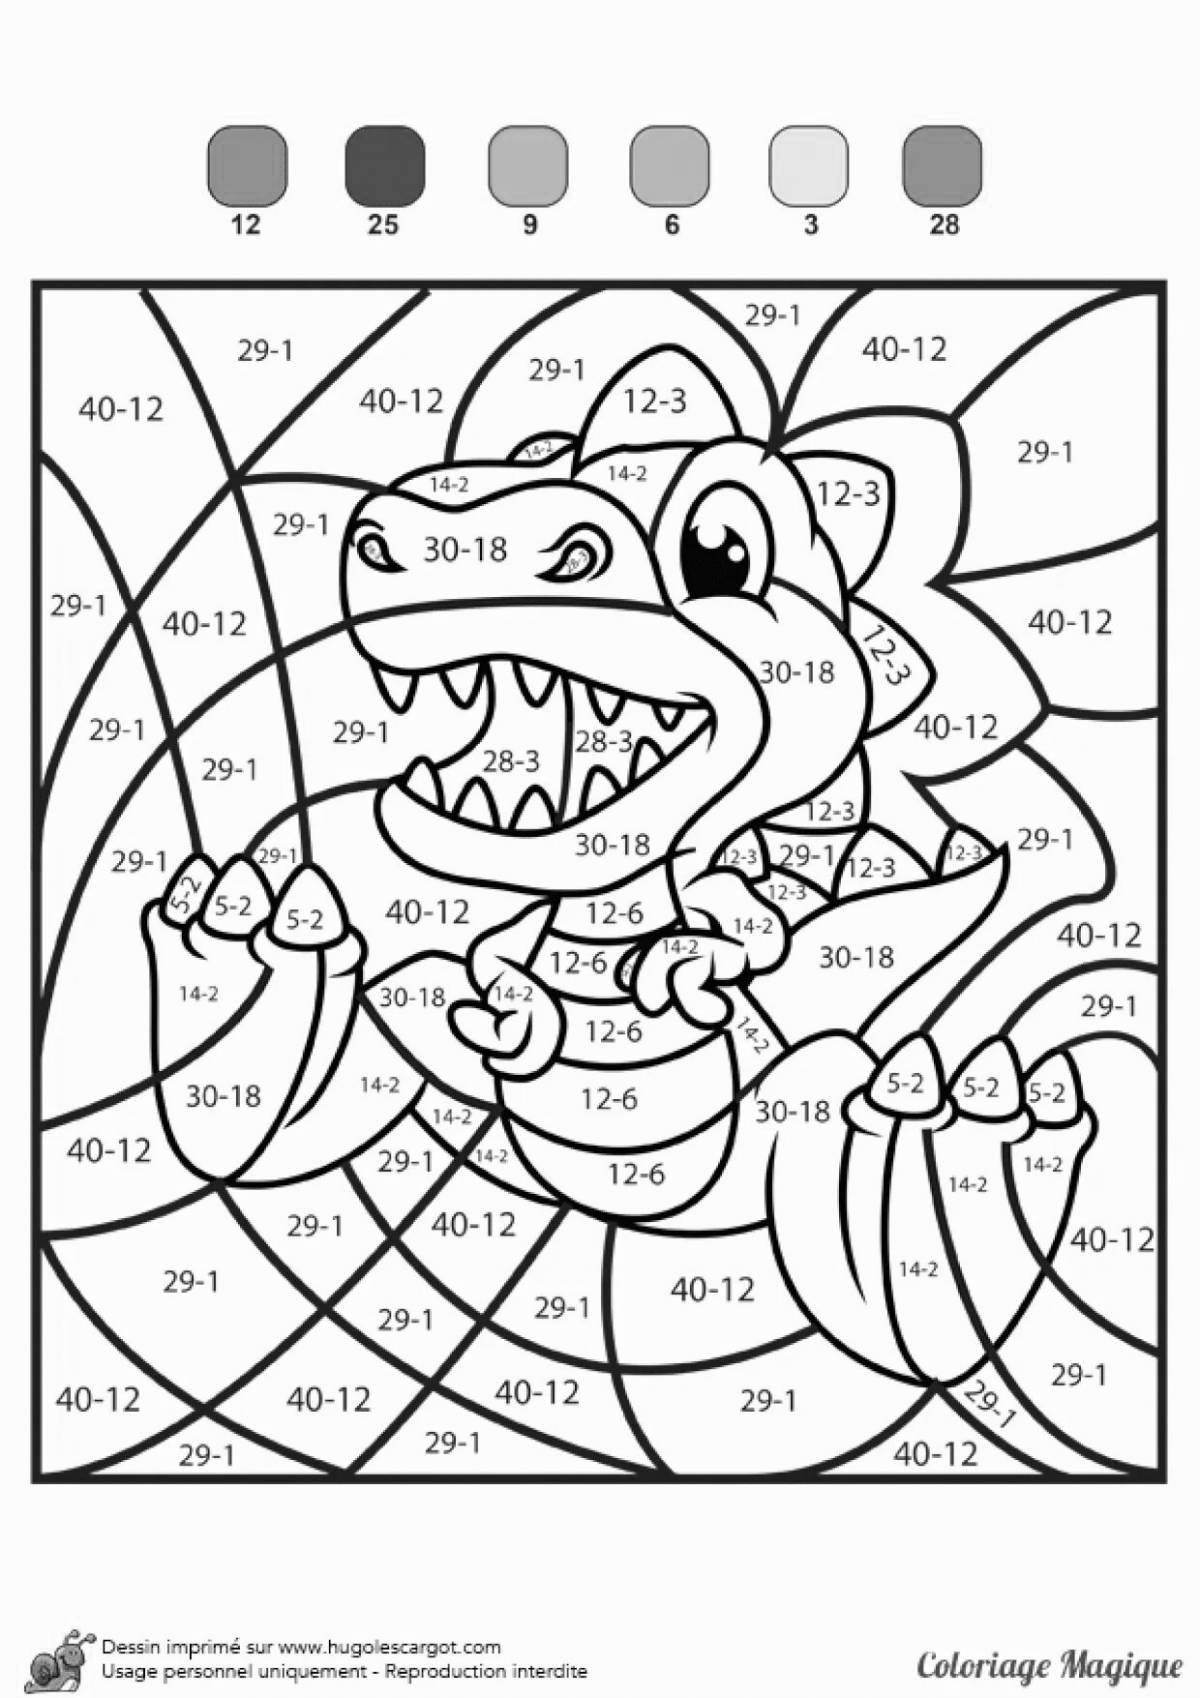 Entertaining coloring by numbers for grade 2